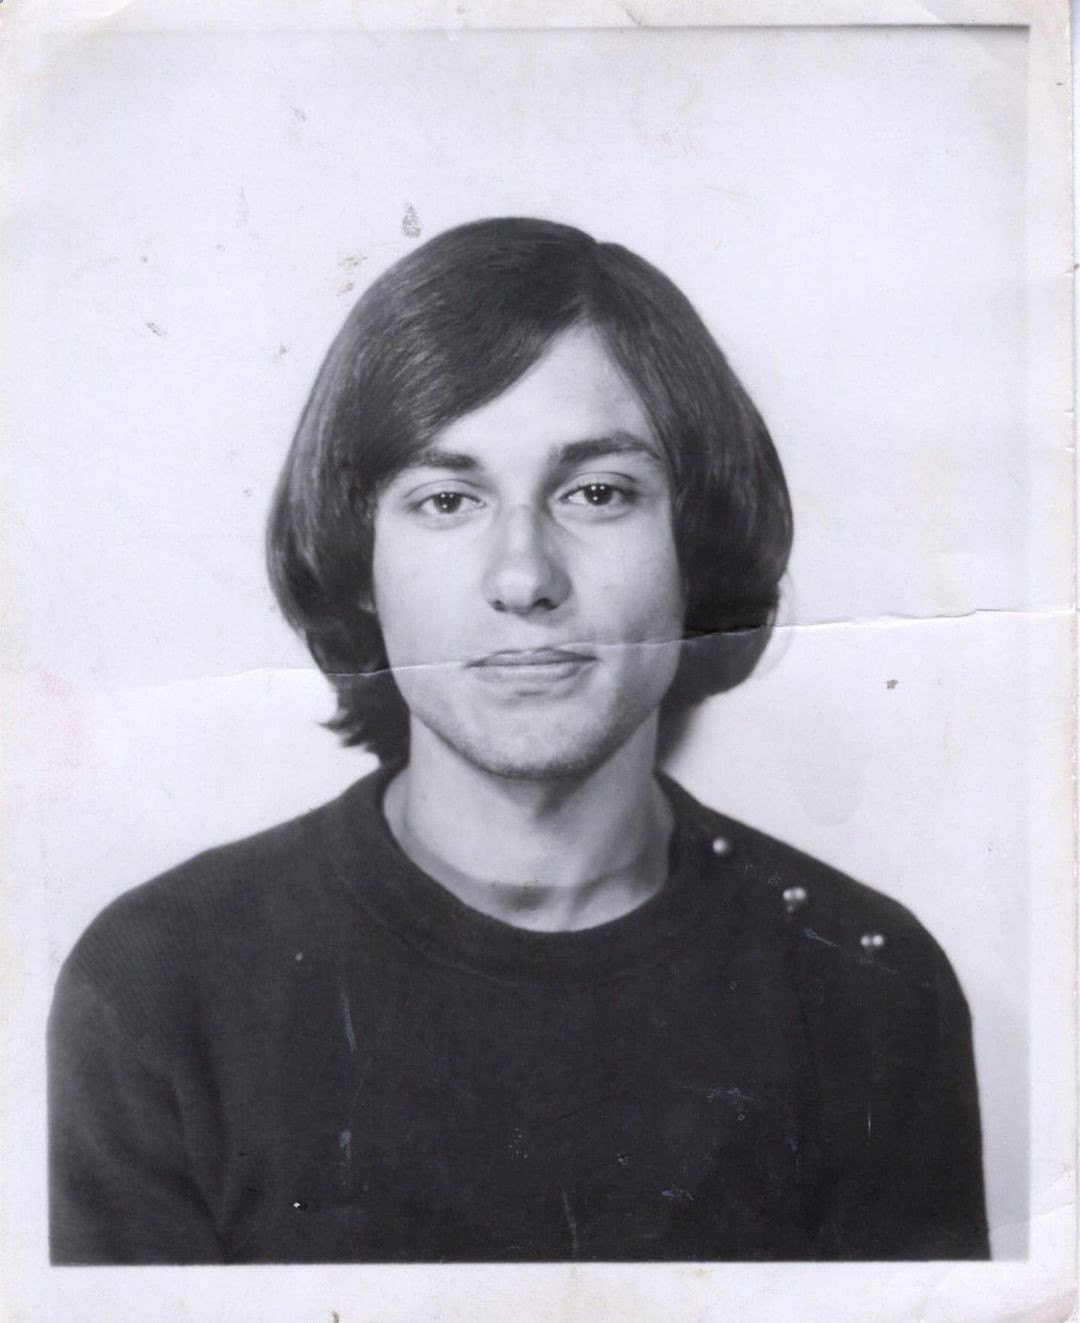 This is Francis Zerah (the surname means “dawning, shining” in Hebrew&nbsp;— not sure if there is an accent on the /e/).Francis was my mother’s Maoist lover in Paris, spring 1970. She left him /and her spiritual homeland/ to return to my biological father, Charlie “Man of Son” Pl*tt.Francis is my spiritual father. My true father. And I always knew this. But now I can finally say it out loud.I would like to find him&nbsp;— he would be in his 70s. If anyone in Paris has a phonebook…https://www.instagram.com/p/CIlT35Th-HE/?igshid=1kjeuyupvf2d6 